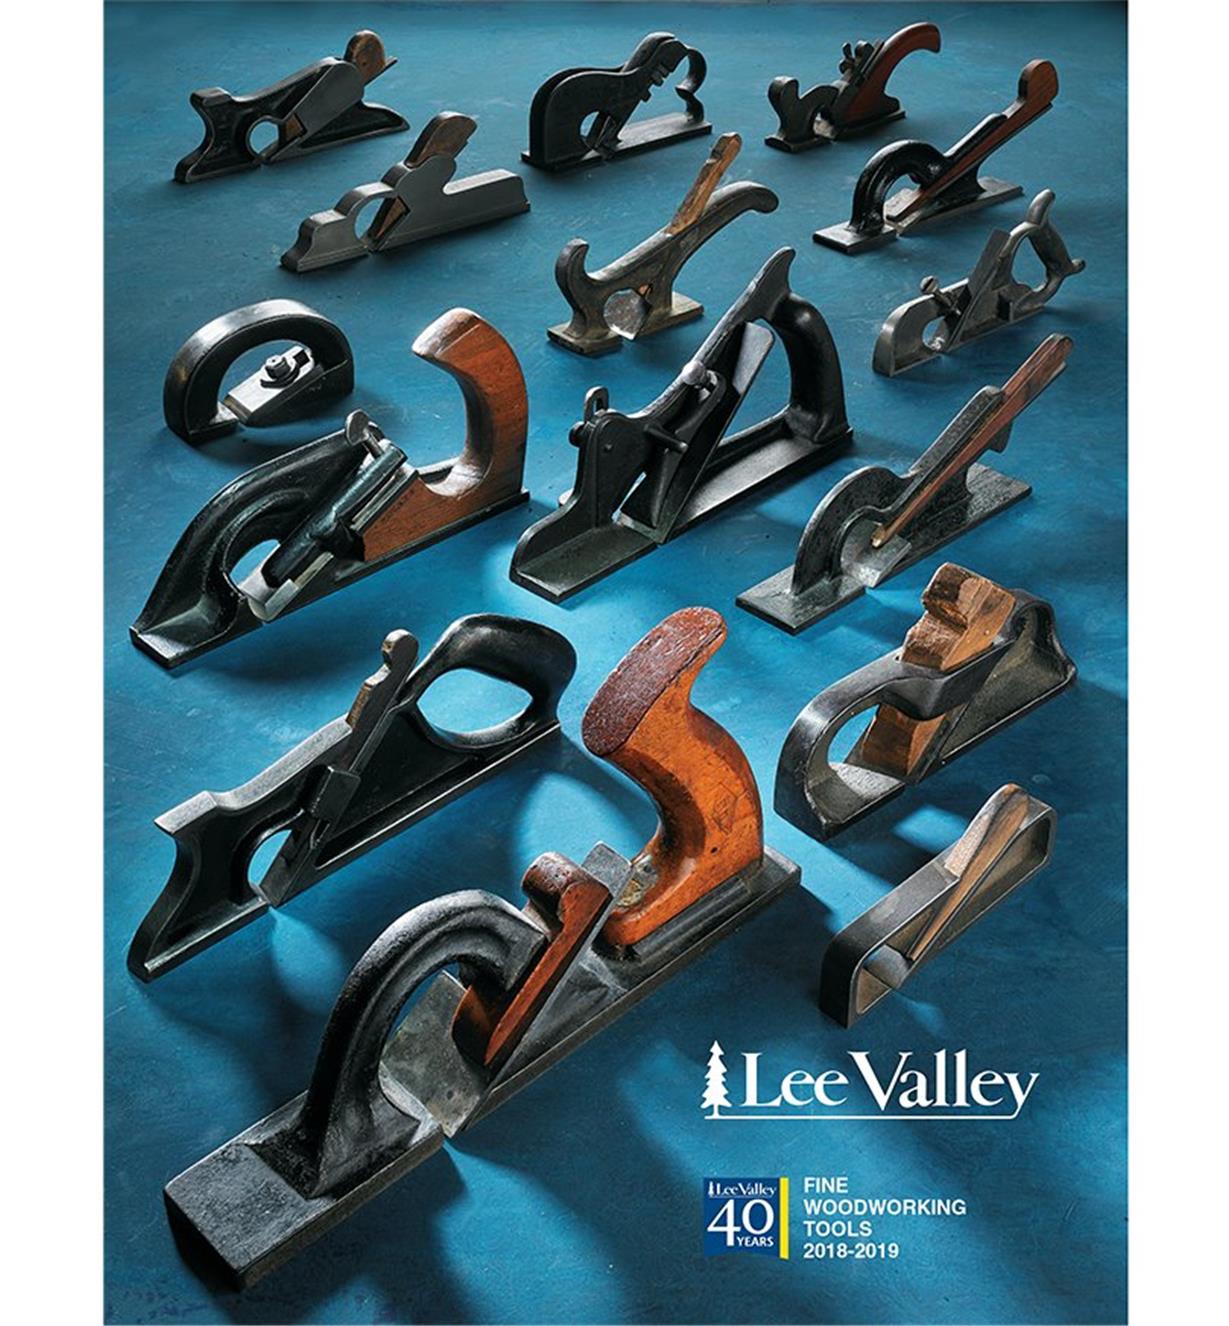 Main Woodworking Catalog 2018 2019 Lee Valley Tools